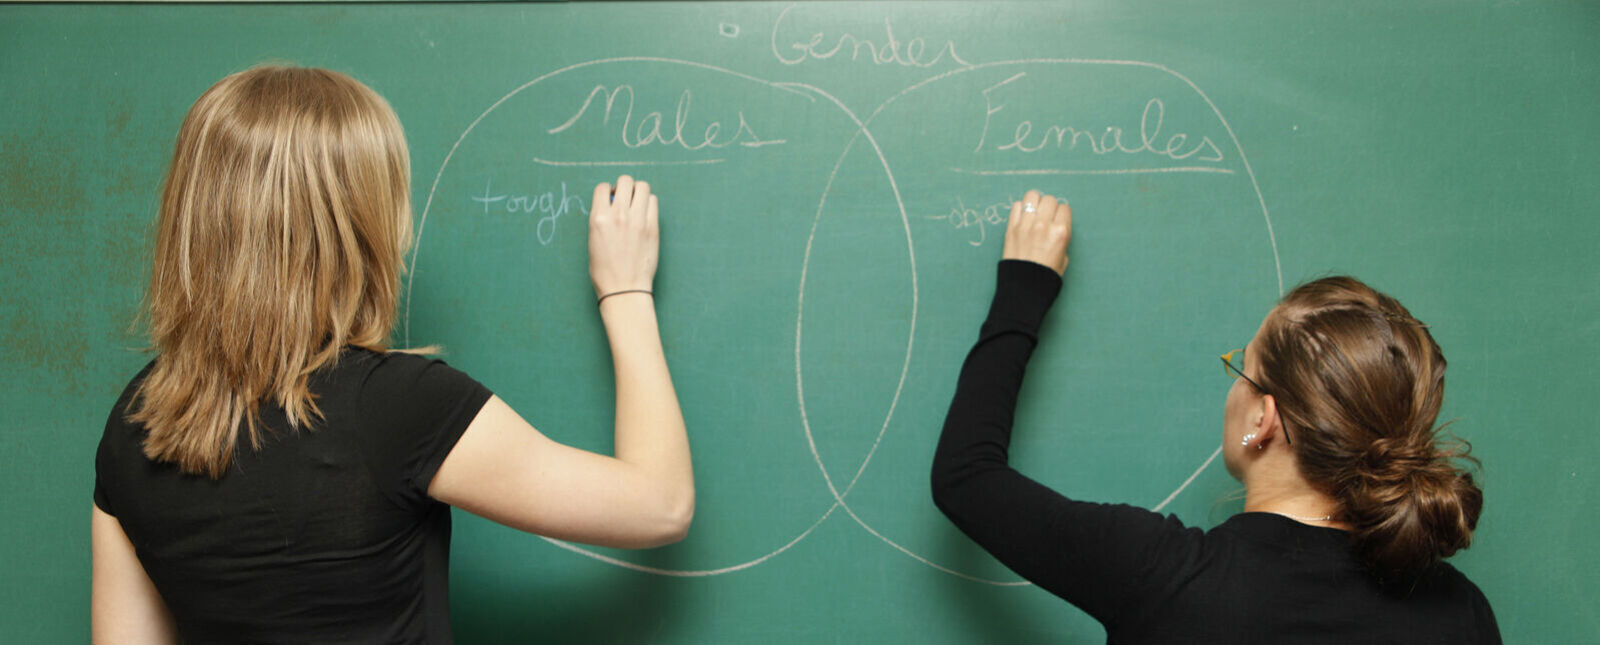 Two female students start lists about males and females on a chalkboard